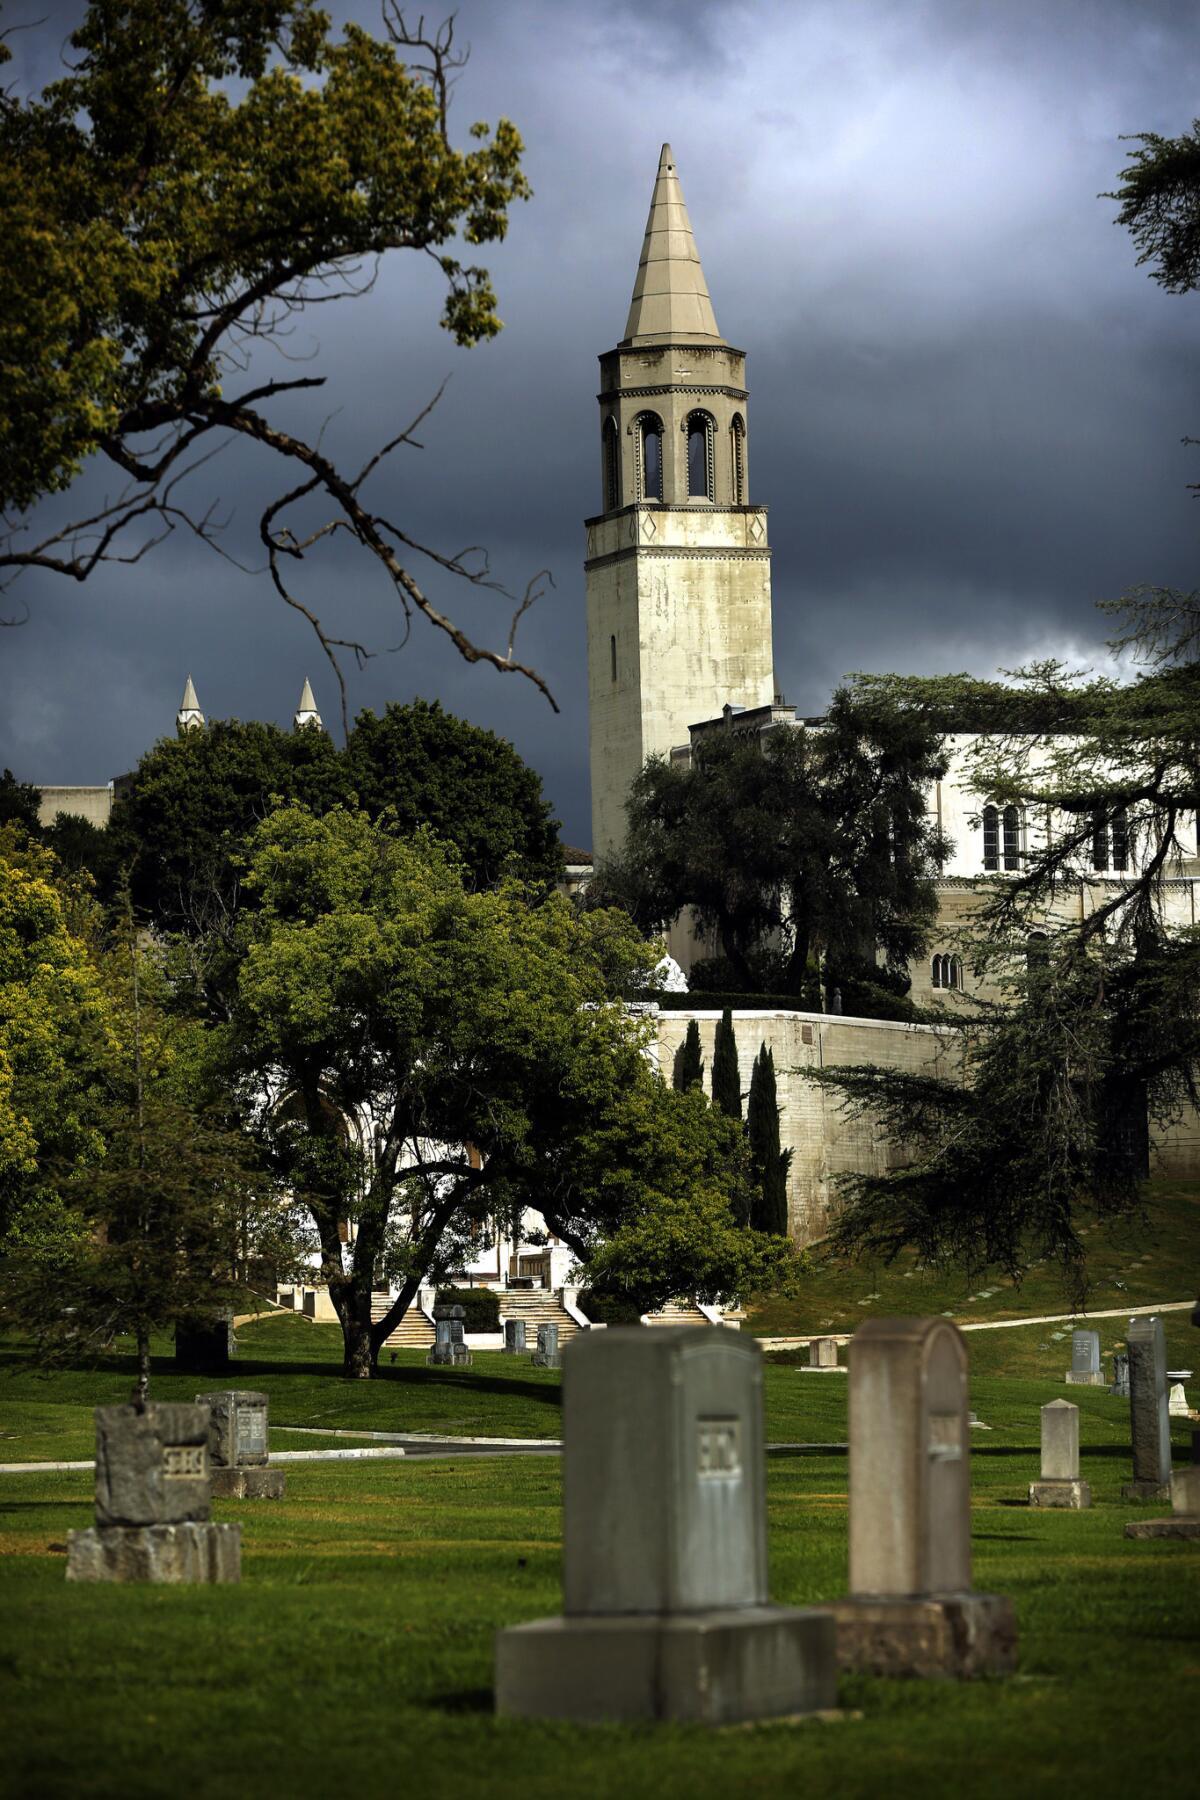 View of the Great Mausoleum at Forest Lawn Cemetery.